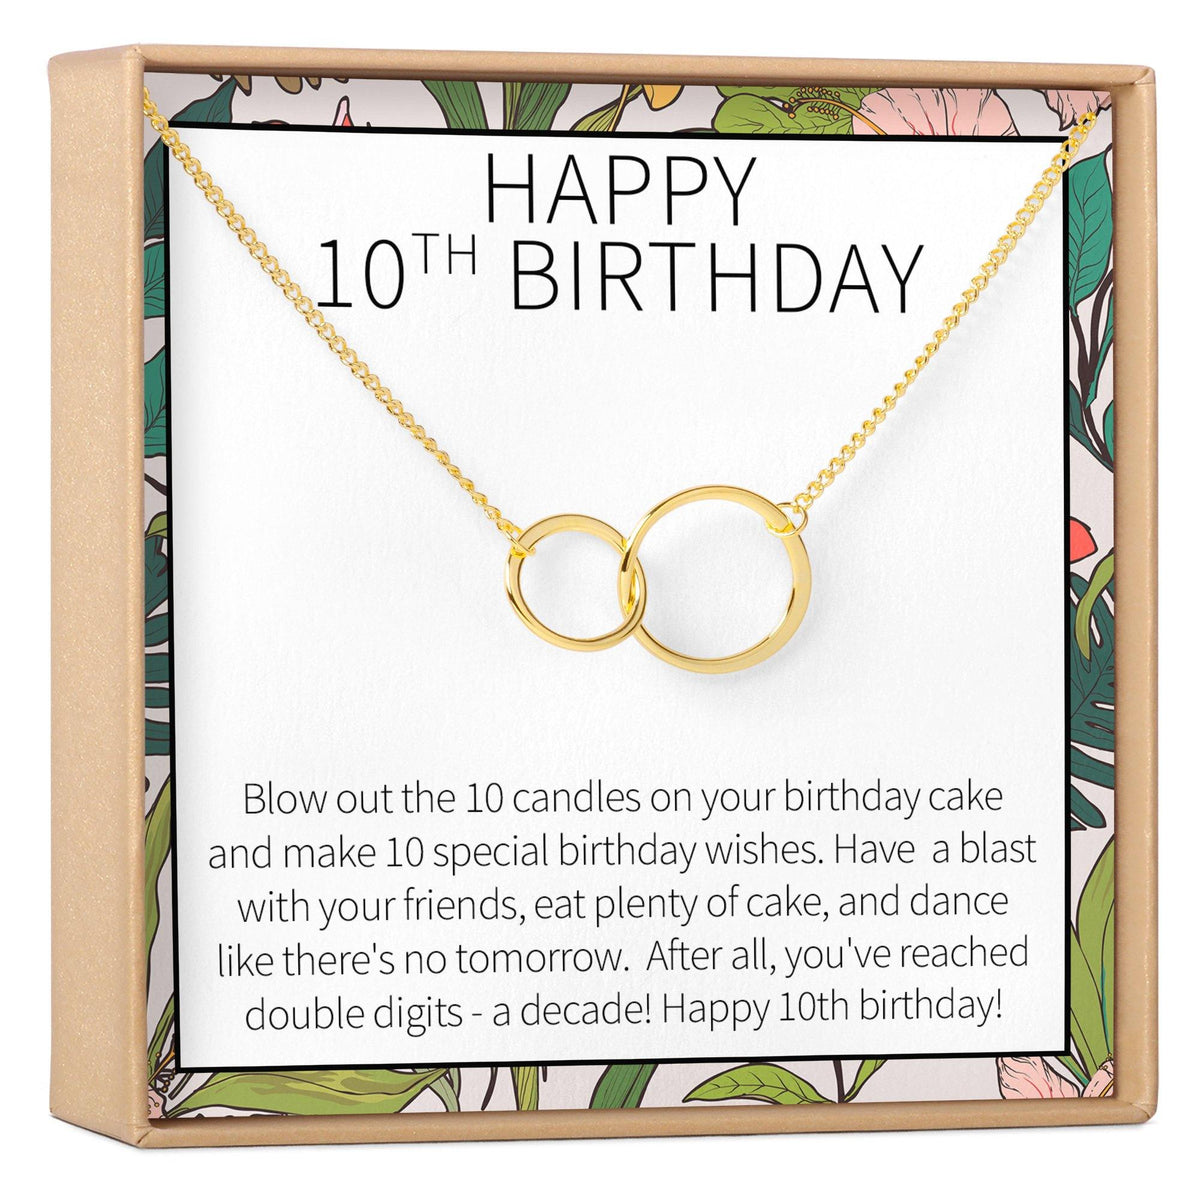 10th Birthday Gift for Girls: Birthday Present for Ten Year Old Girl, Necklace, Jewelry, Bday Gift, Gift Idea, Daughter, Niece, 2 Linked Circles